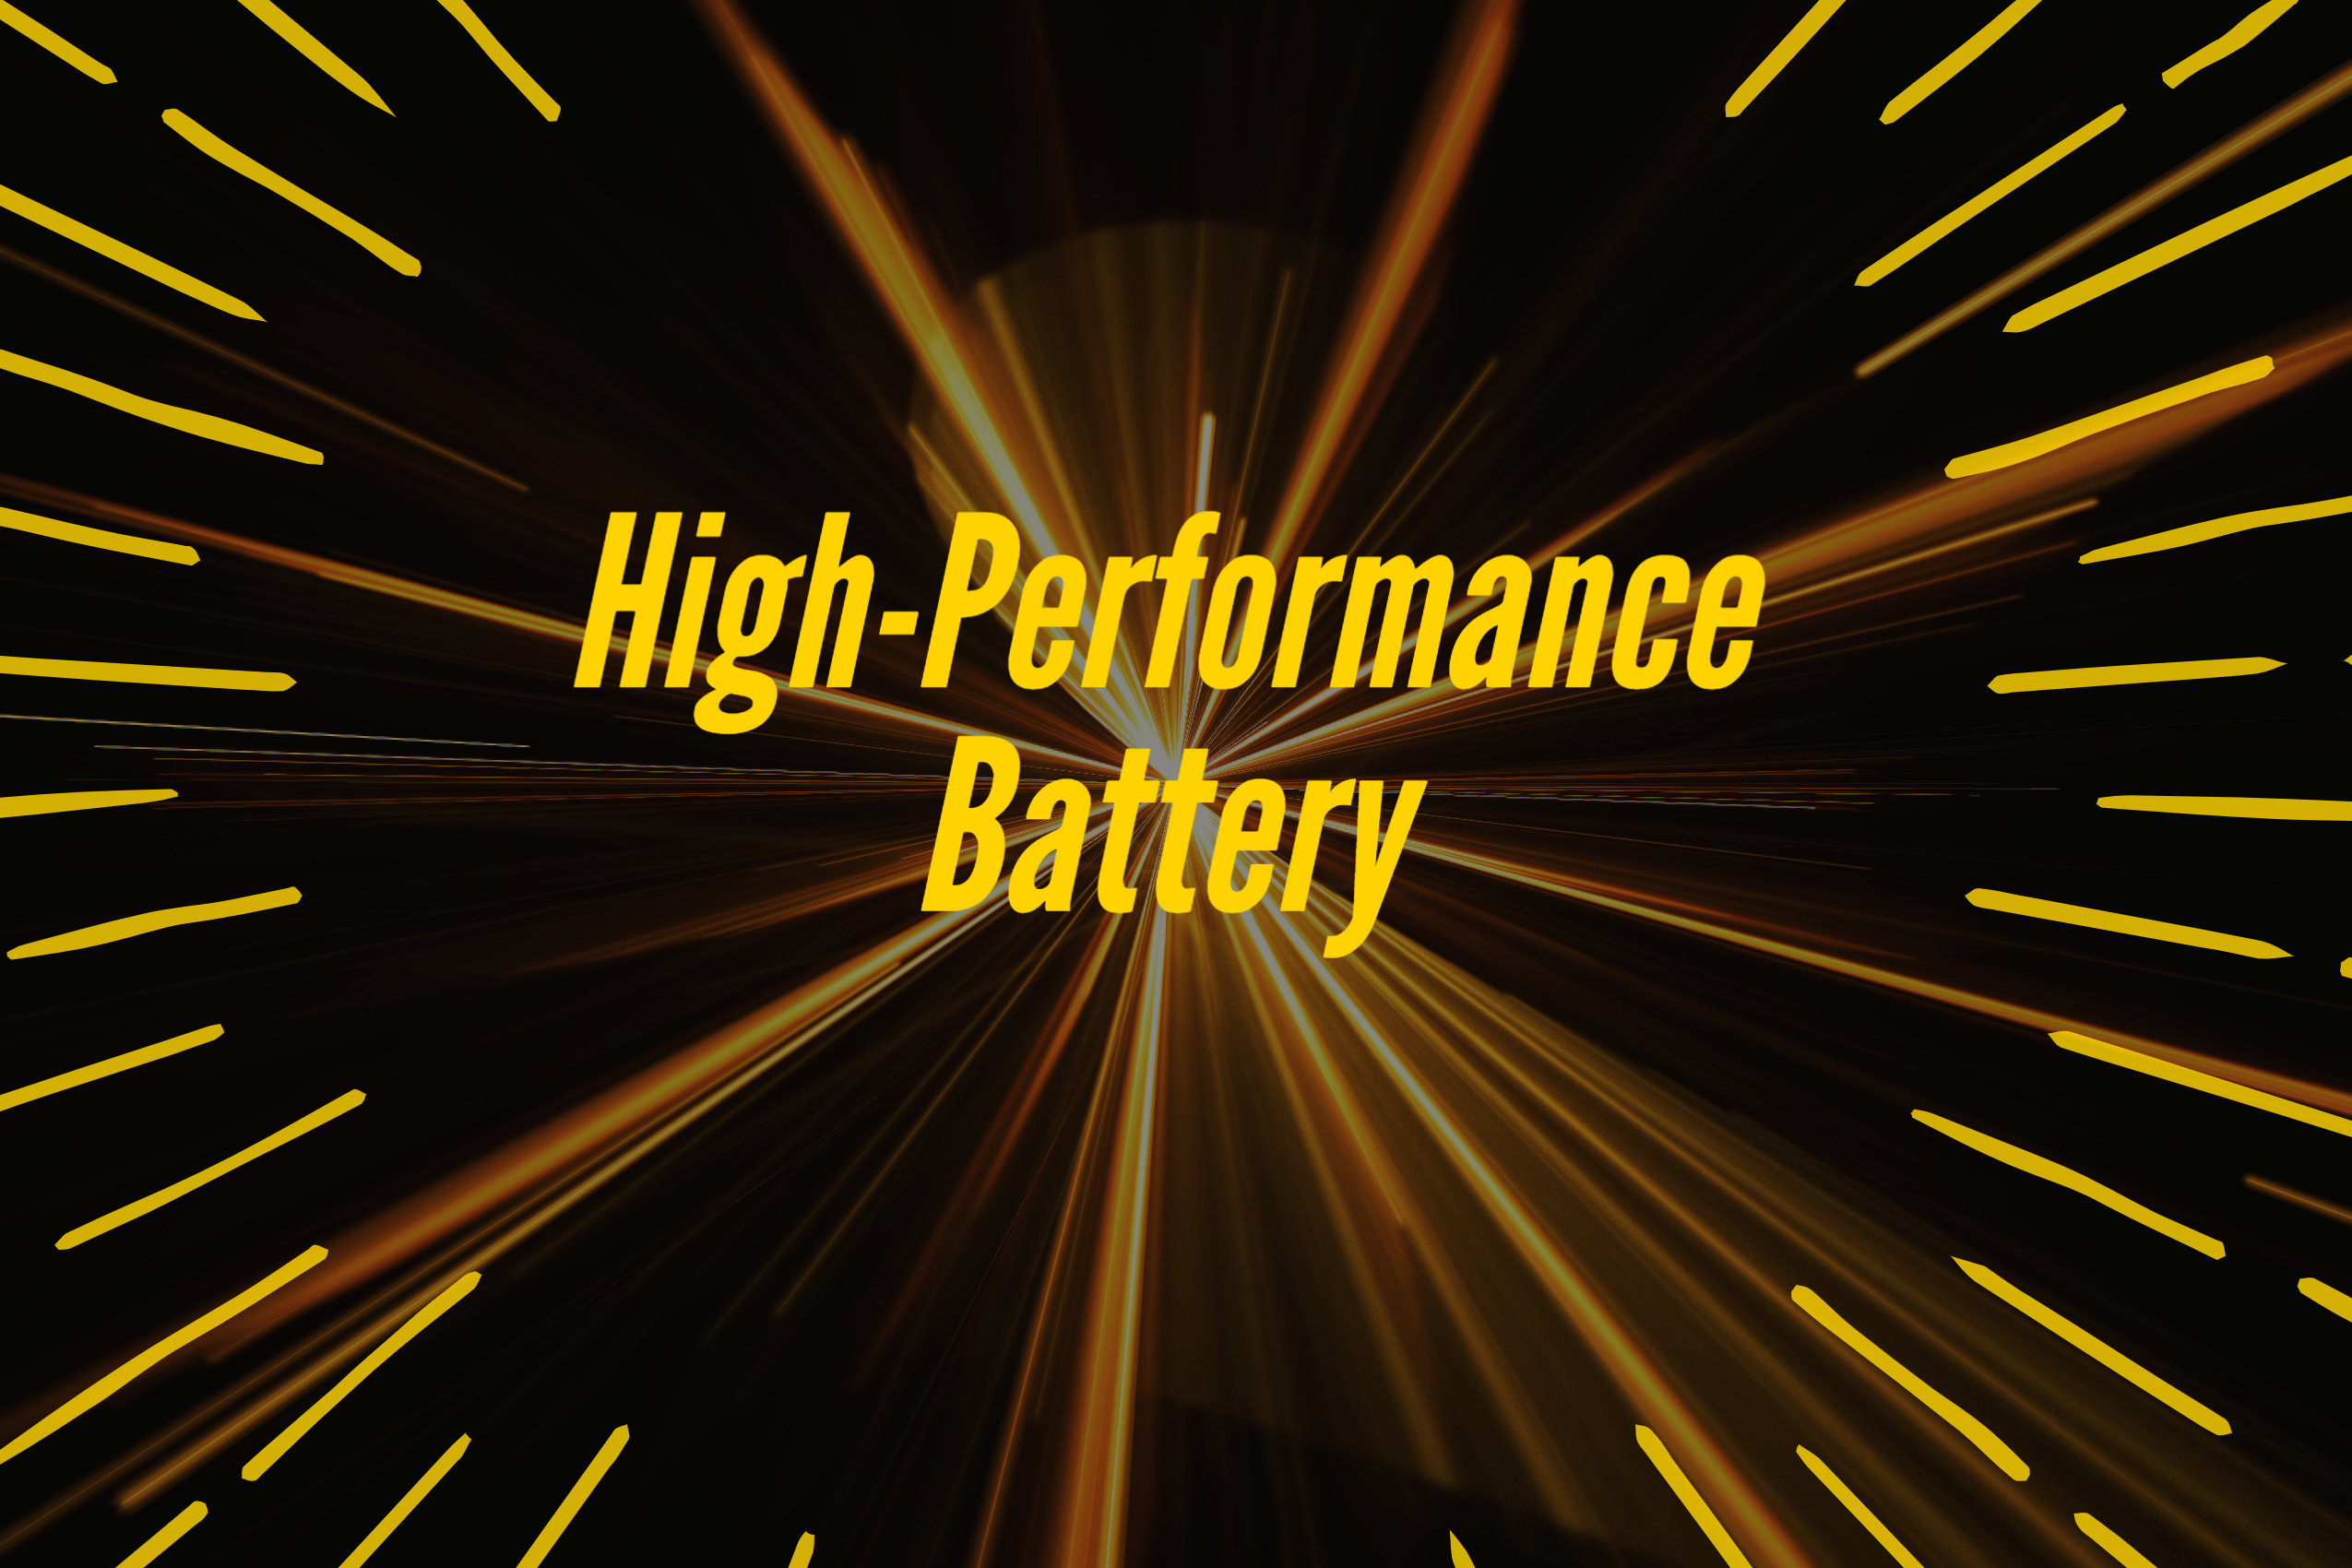 featured image of high battery performance text